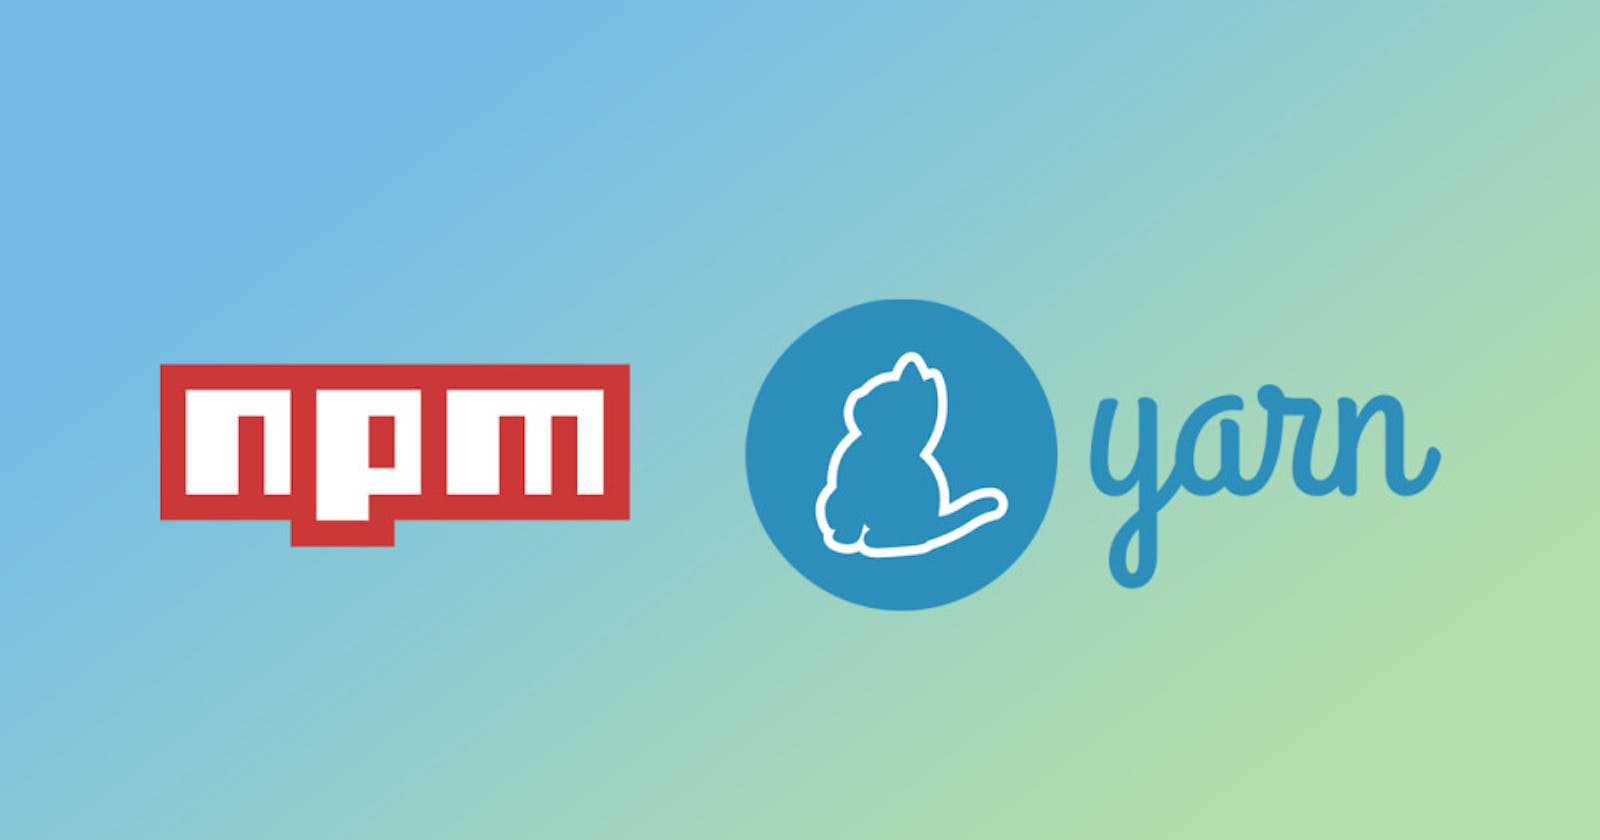 Comparing Yarn and NPM: Two Leading Package Managers for JavaScript